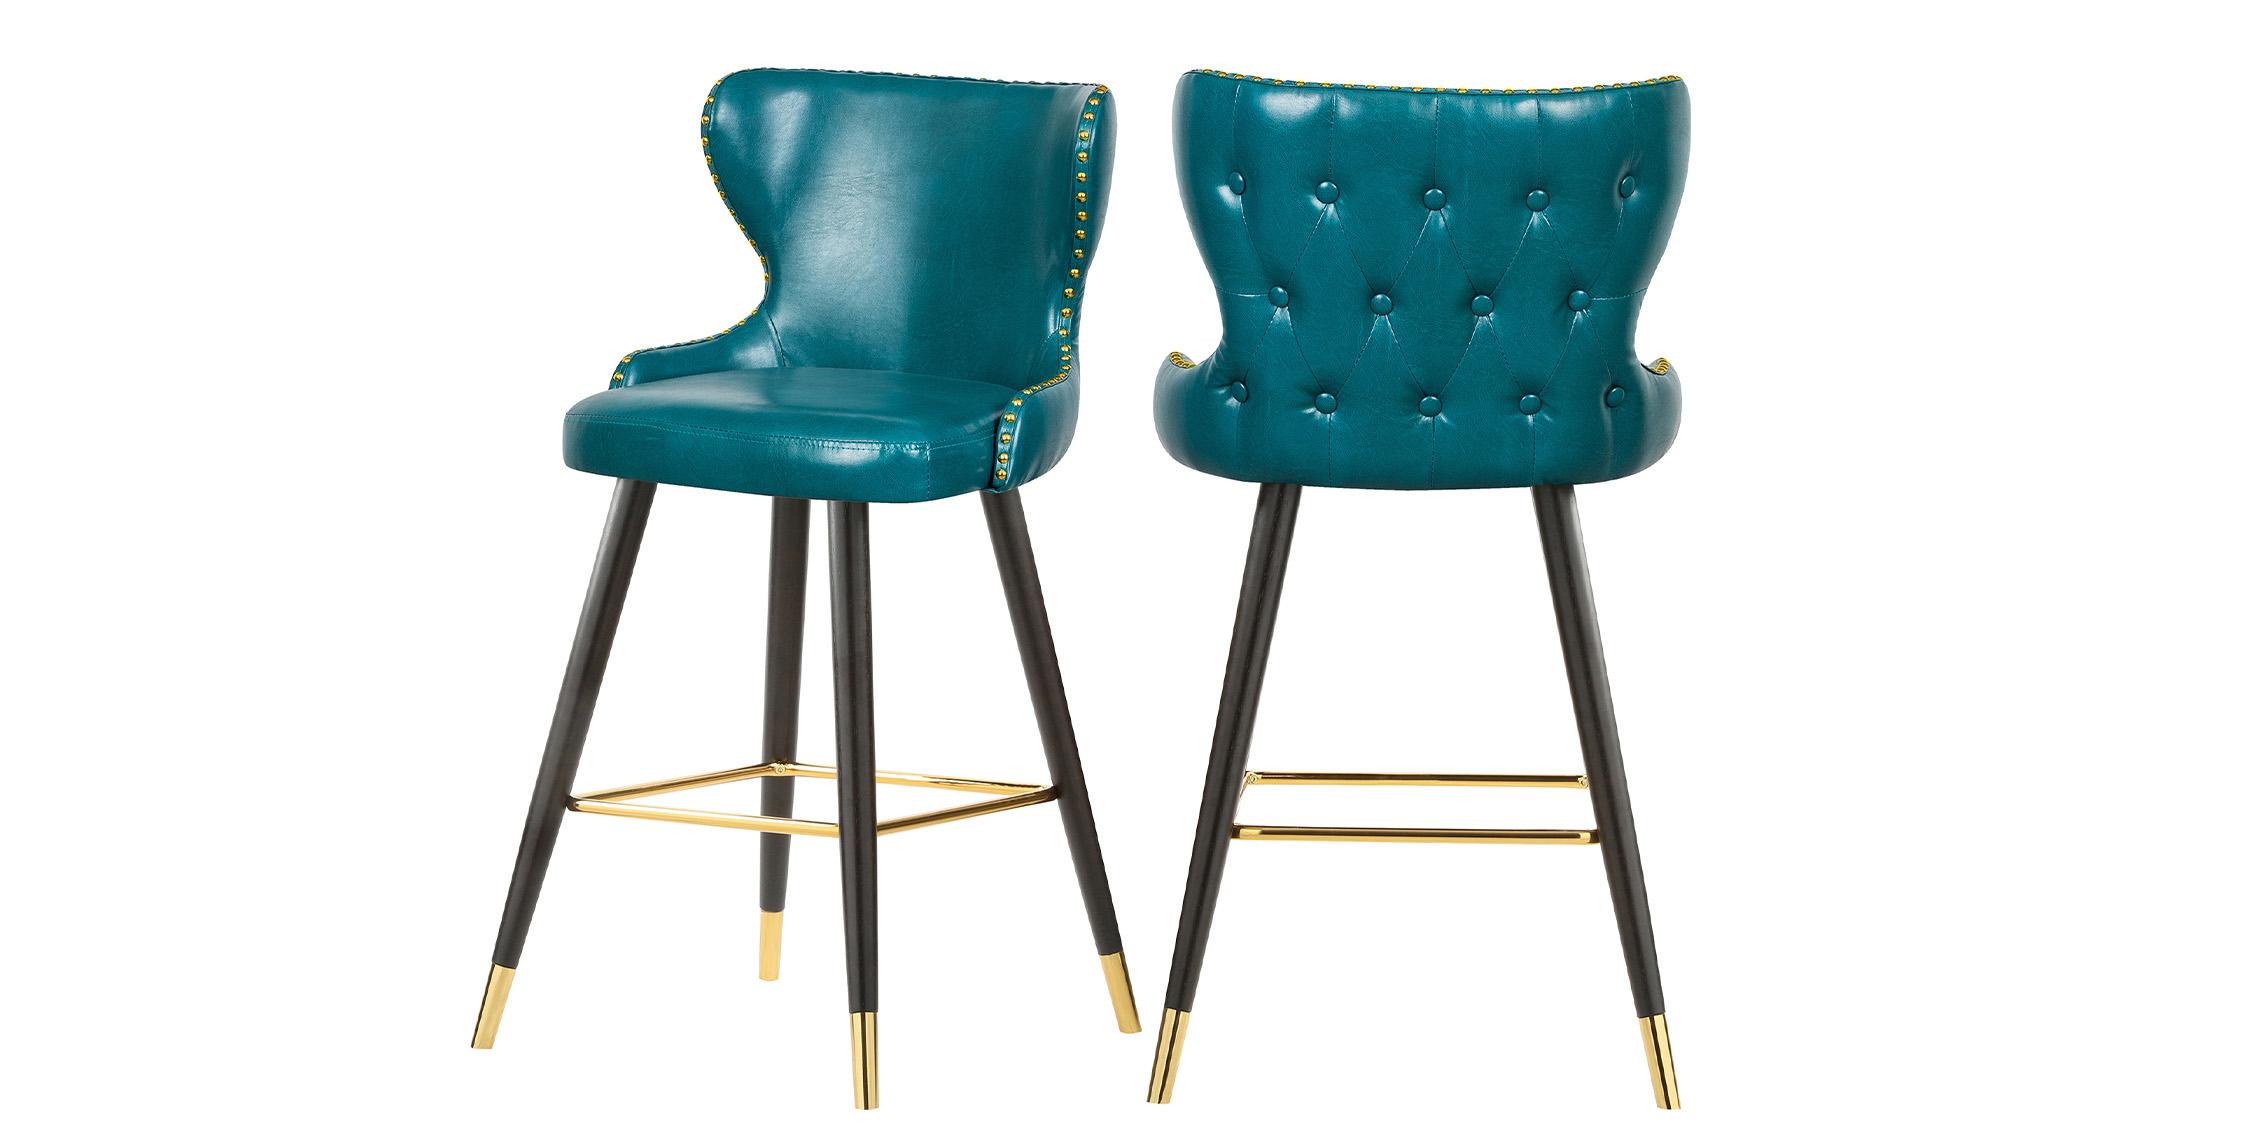 Contemporary, Modern Counter Stool Set HENDRIX 962Blue-C 962Blue-C in Blue Faux Leather